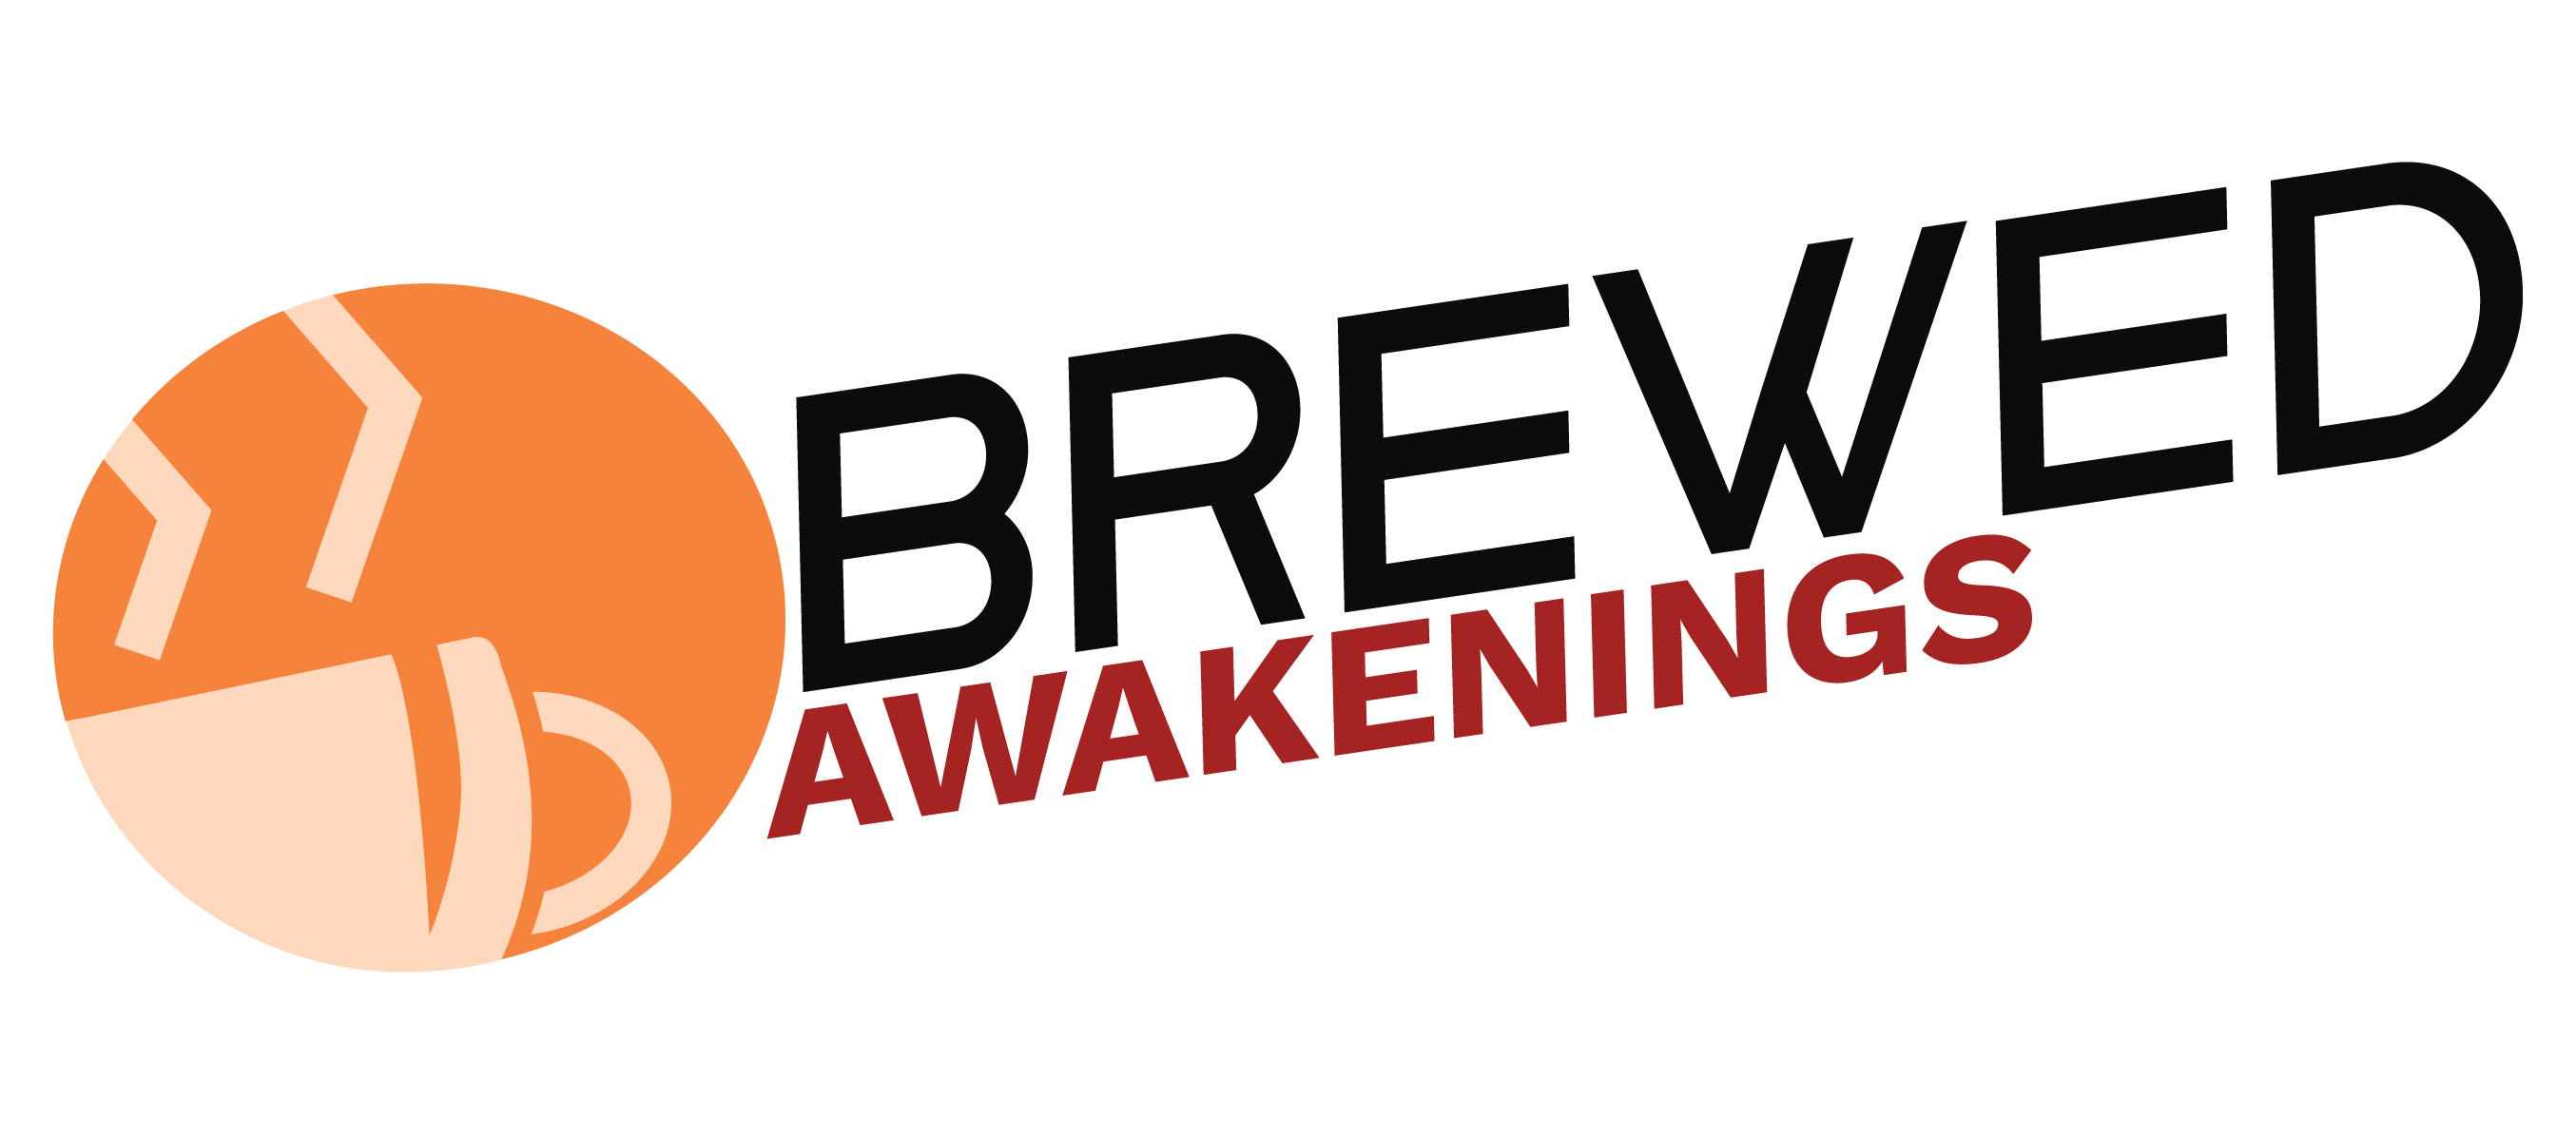 The finished logo for the Brewed Awakenings rebrand.